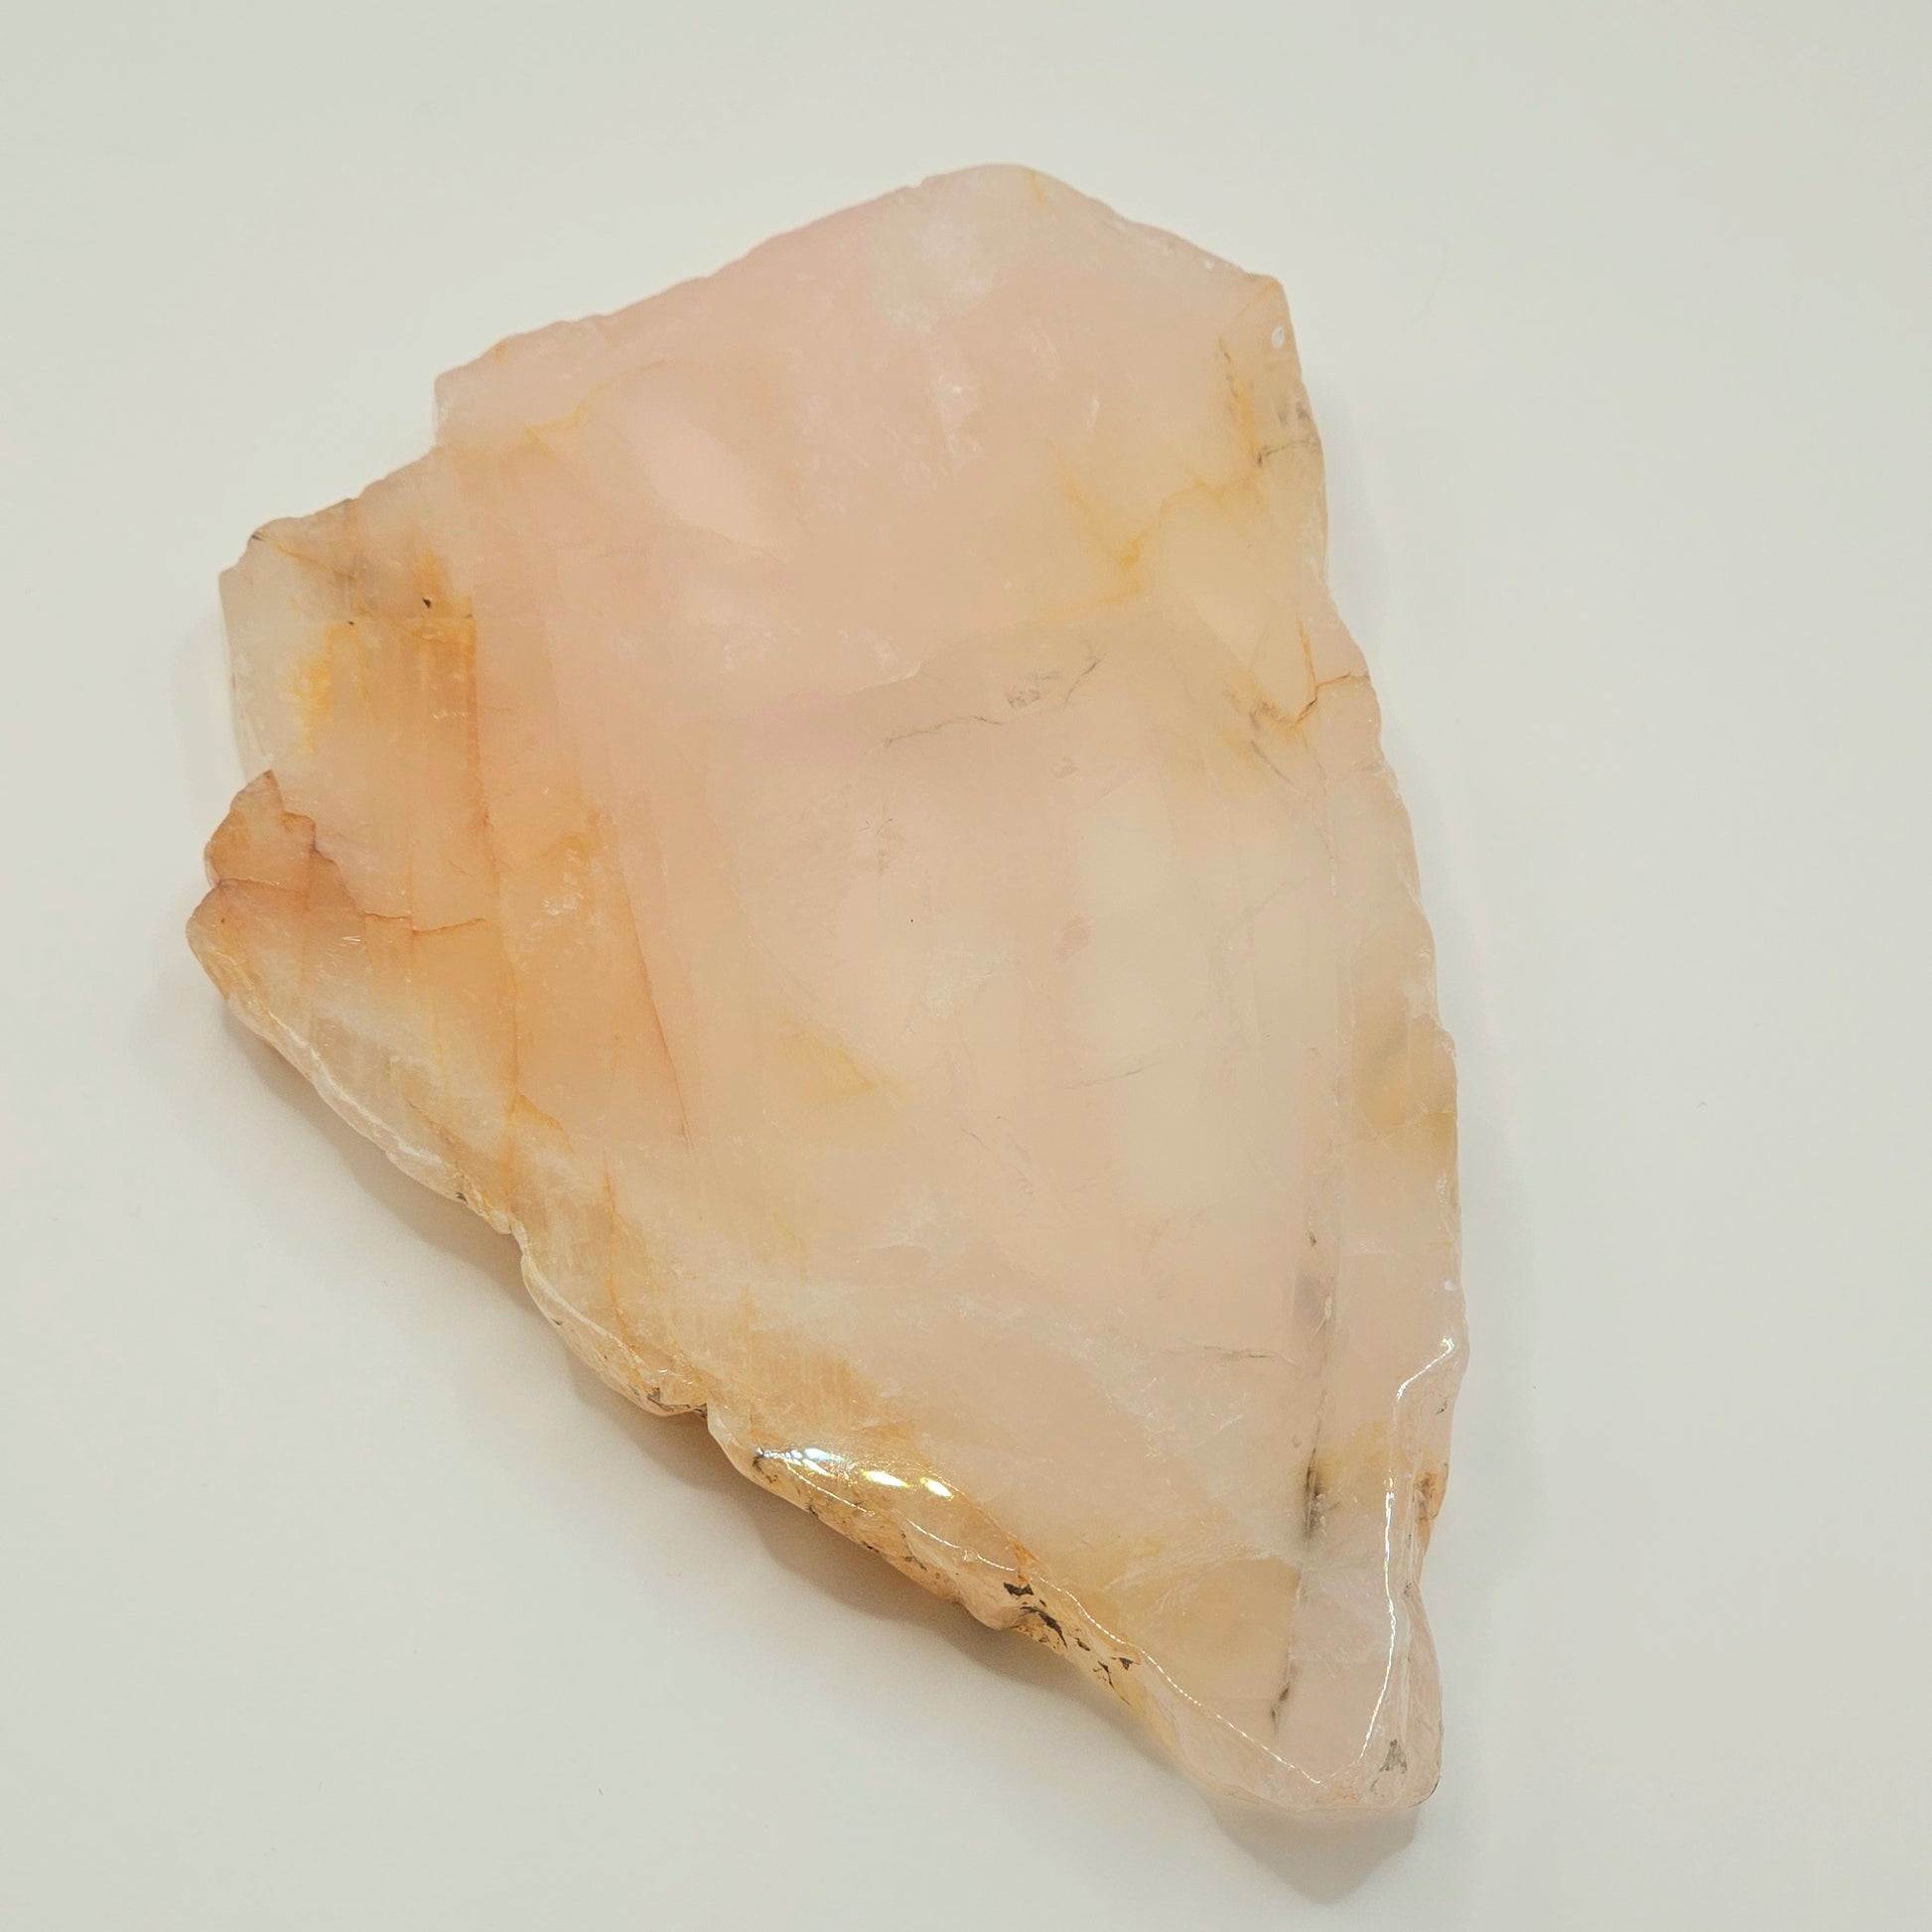 High quality Rose Quartz slab from Mozambique with dendritic inclusions and rainbows.